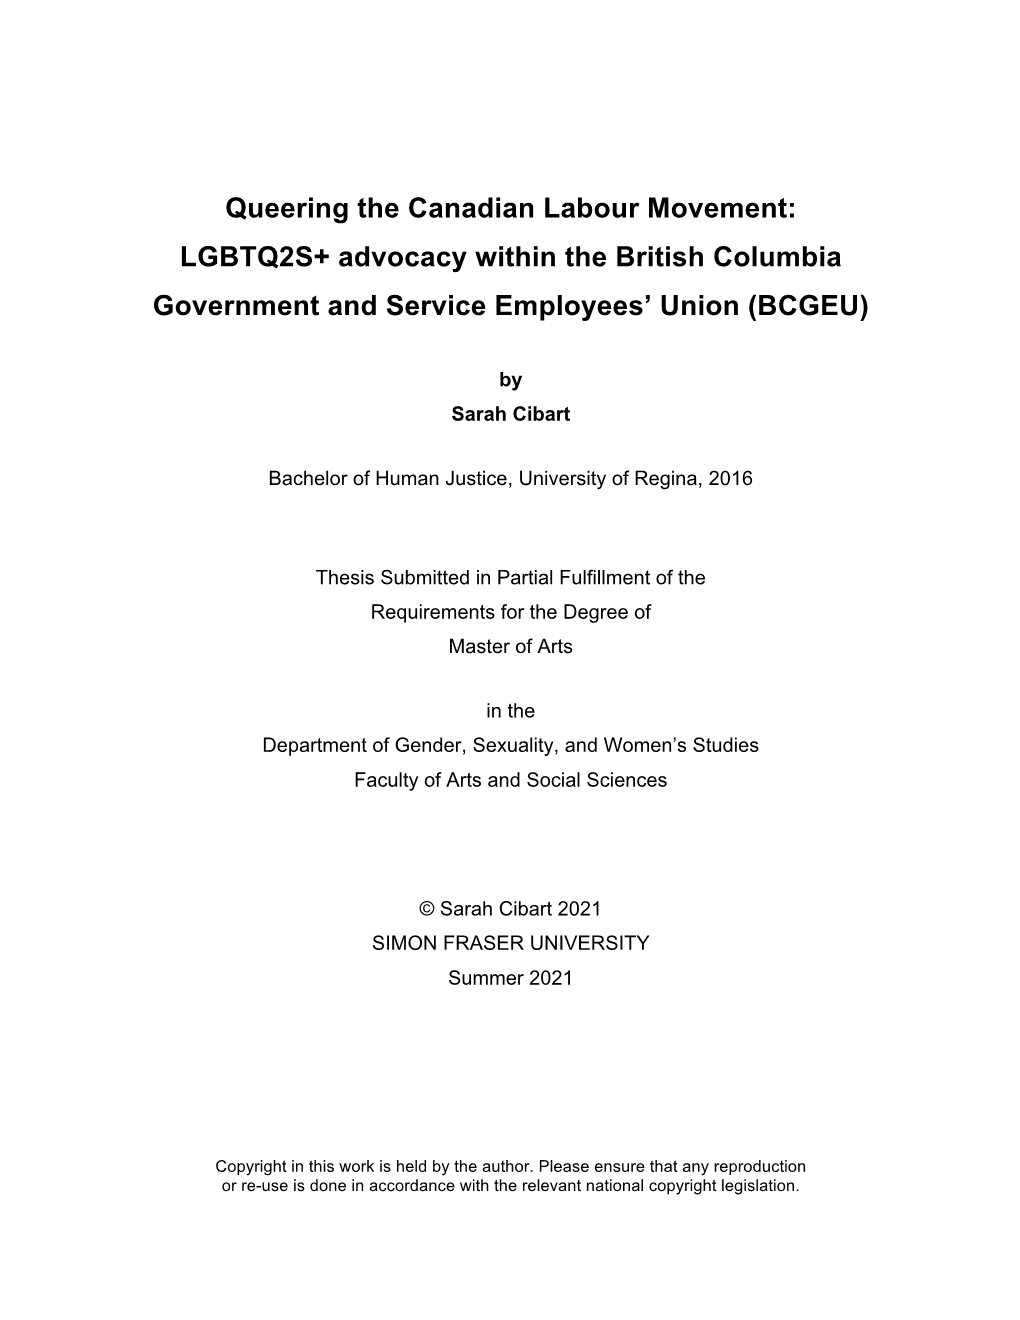 Queering the Canadian Labour Movement: LGBTQ2S+ Advocacy Within the British Columbia Government and Service Employees’ Union (BCGEU)